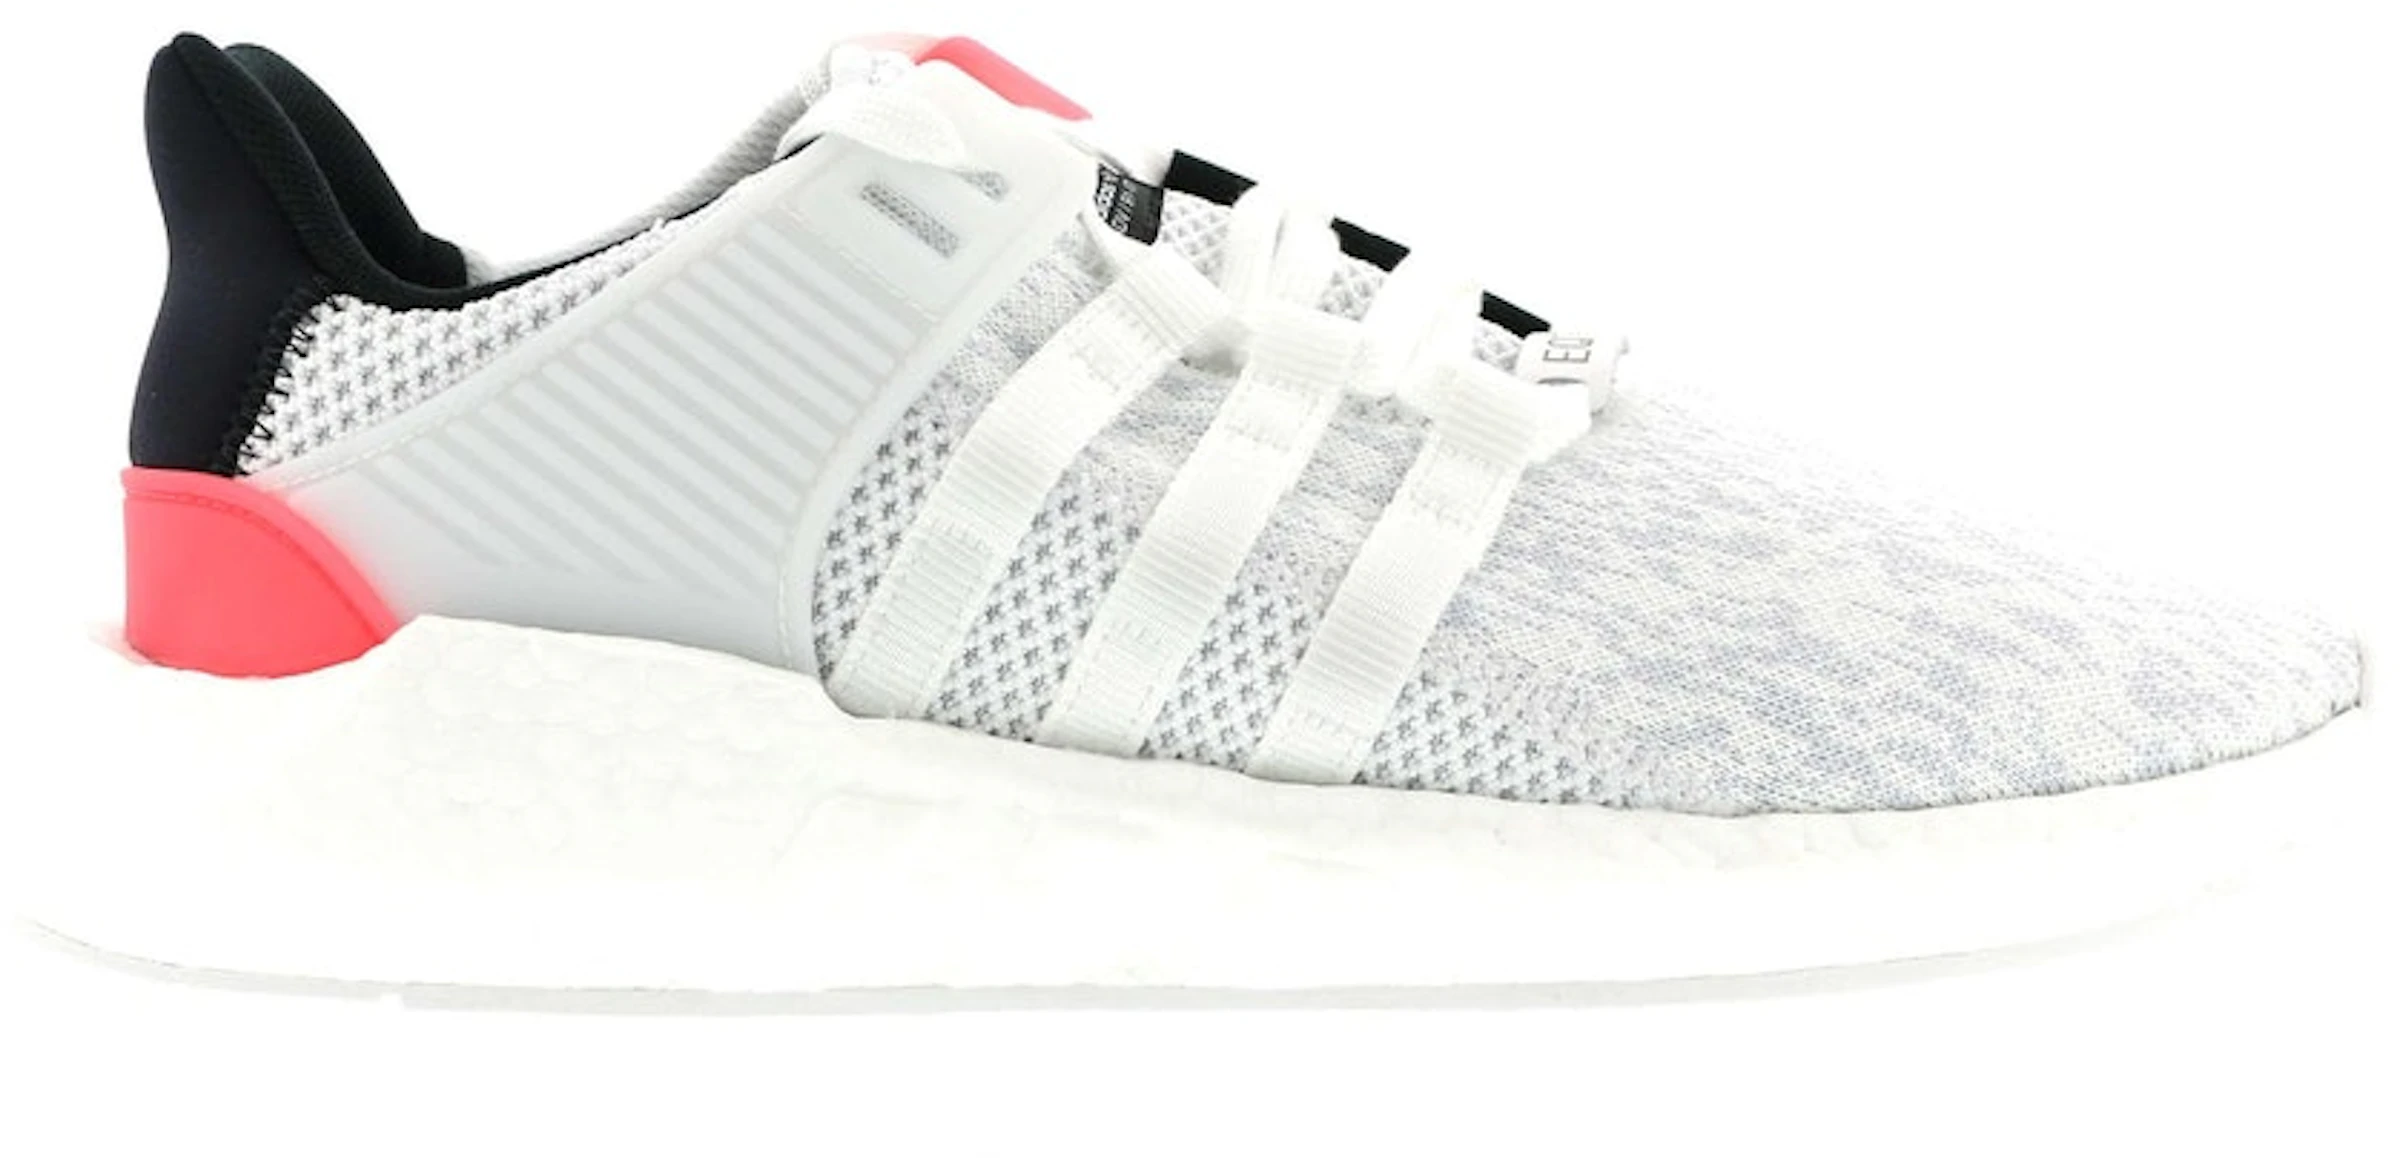 adidas EQT Support 93/17 White Red - BA7473 -